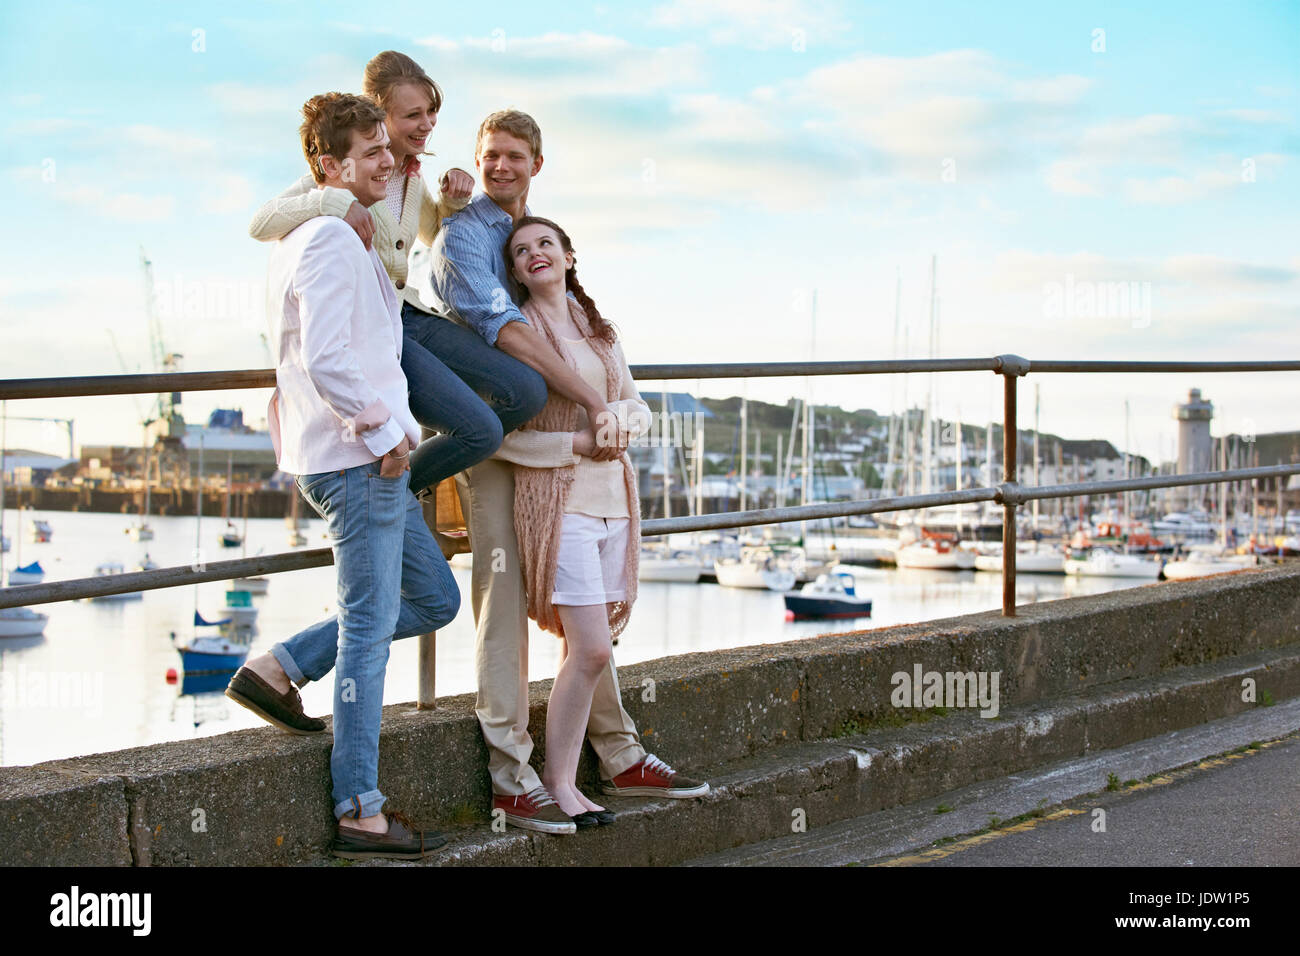 Couples standing by railing of harbor Stock Photo